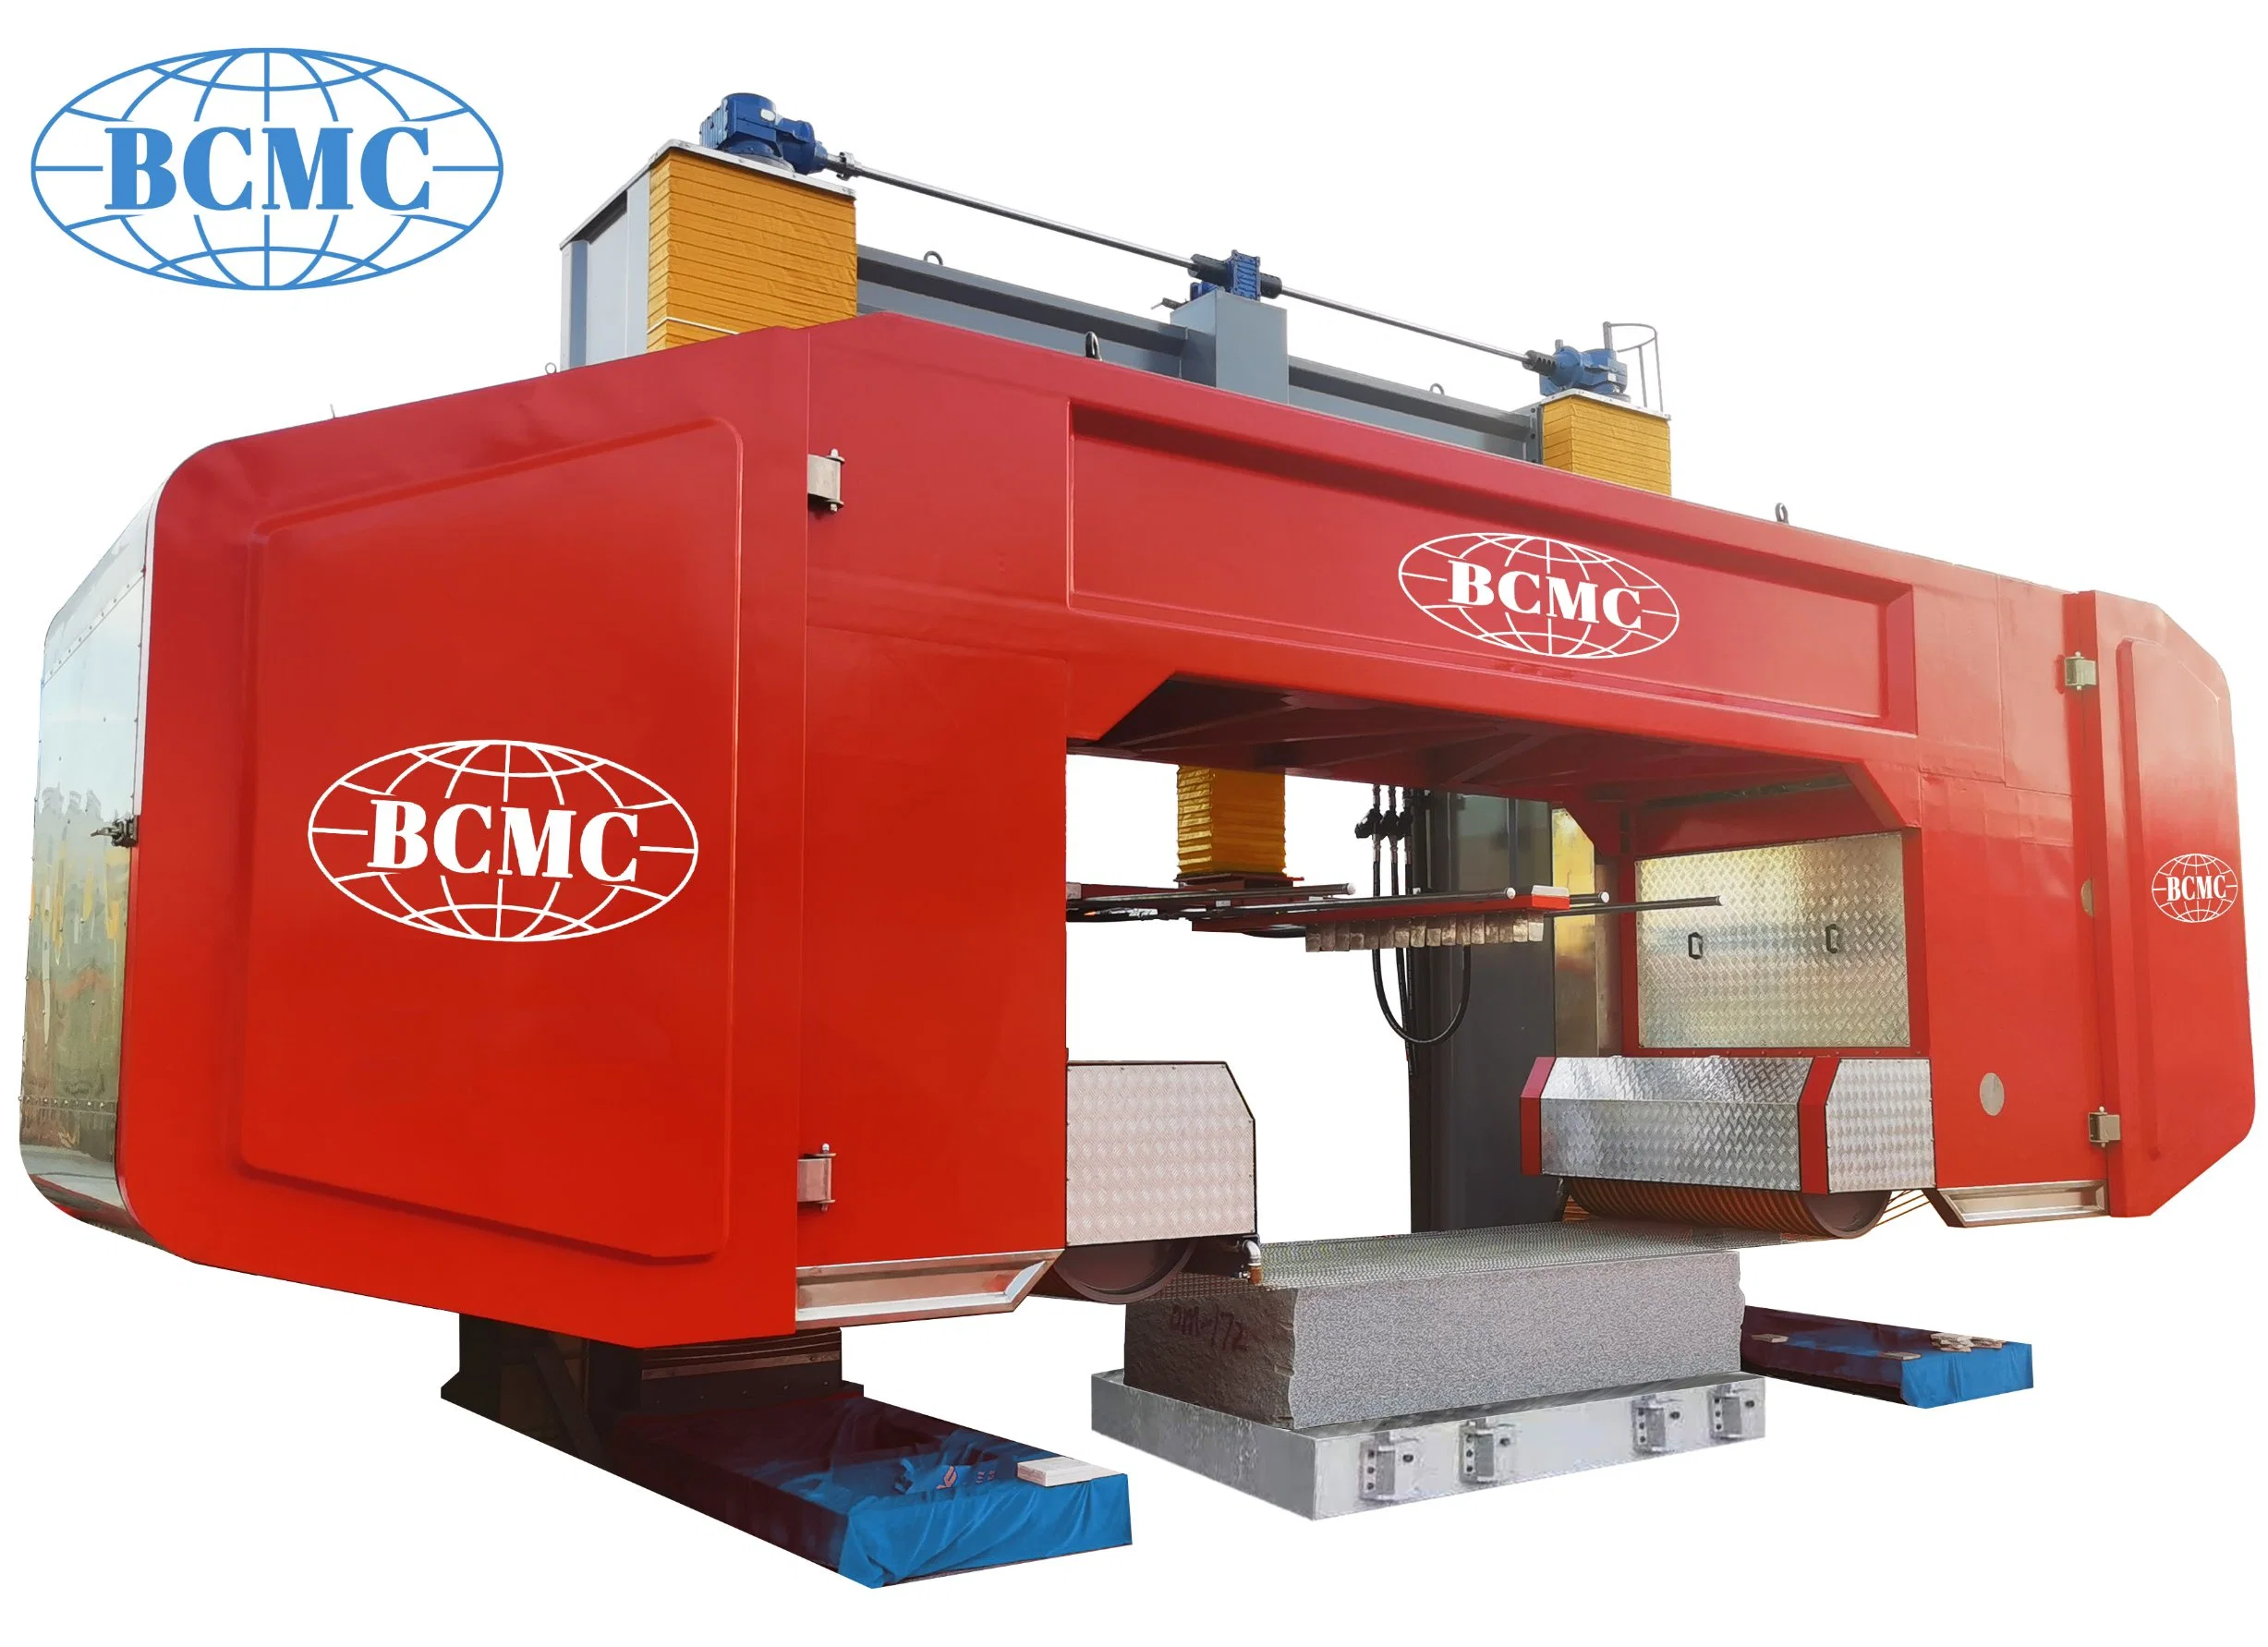 Bcmc Bcmw-36 Multi Wires Diamond Rope Block Cutting Machine High Efficiency Output Granite Marble Slab Wire Saw for Sale